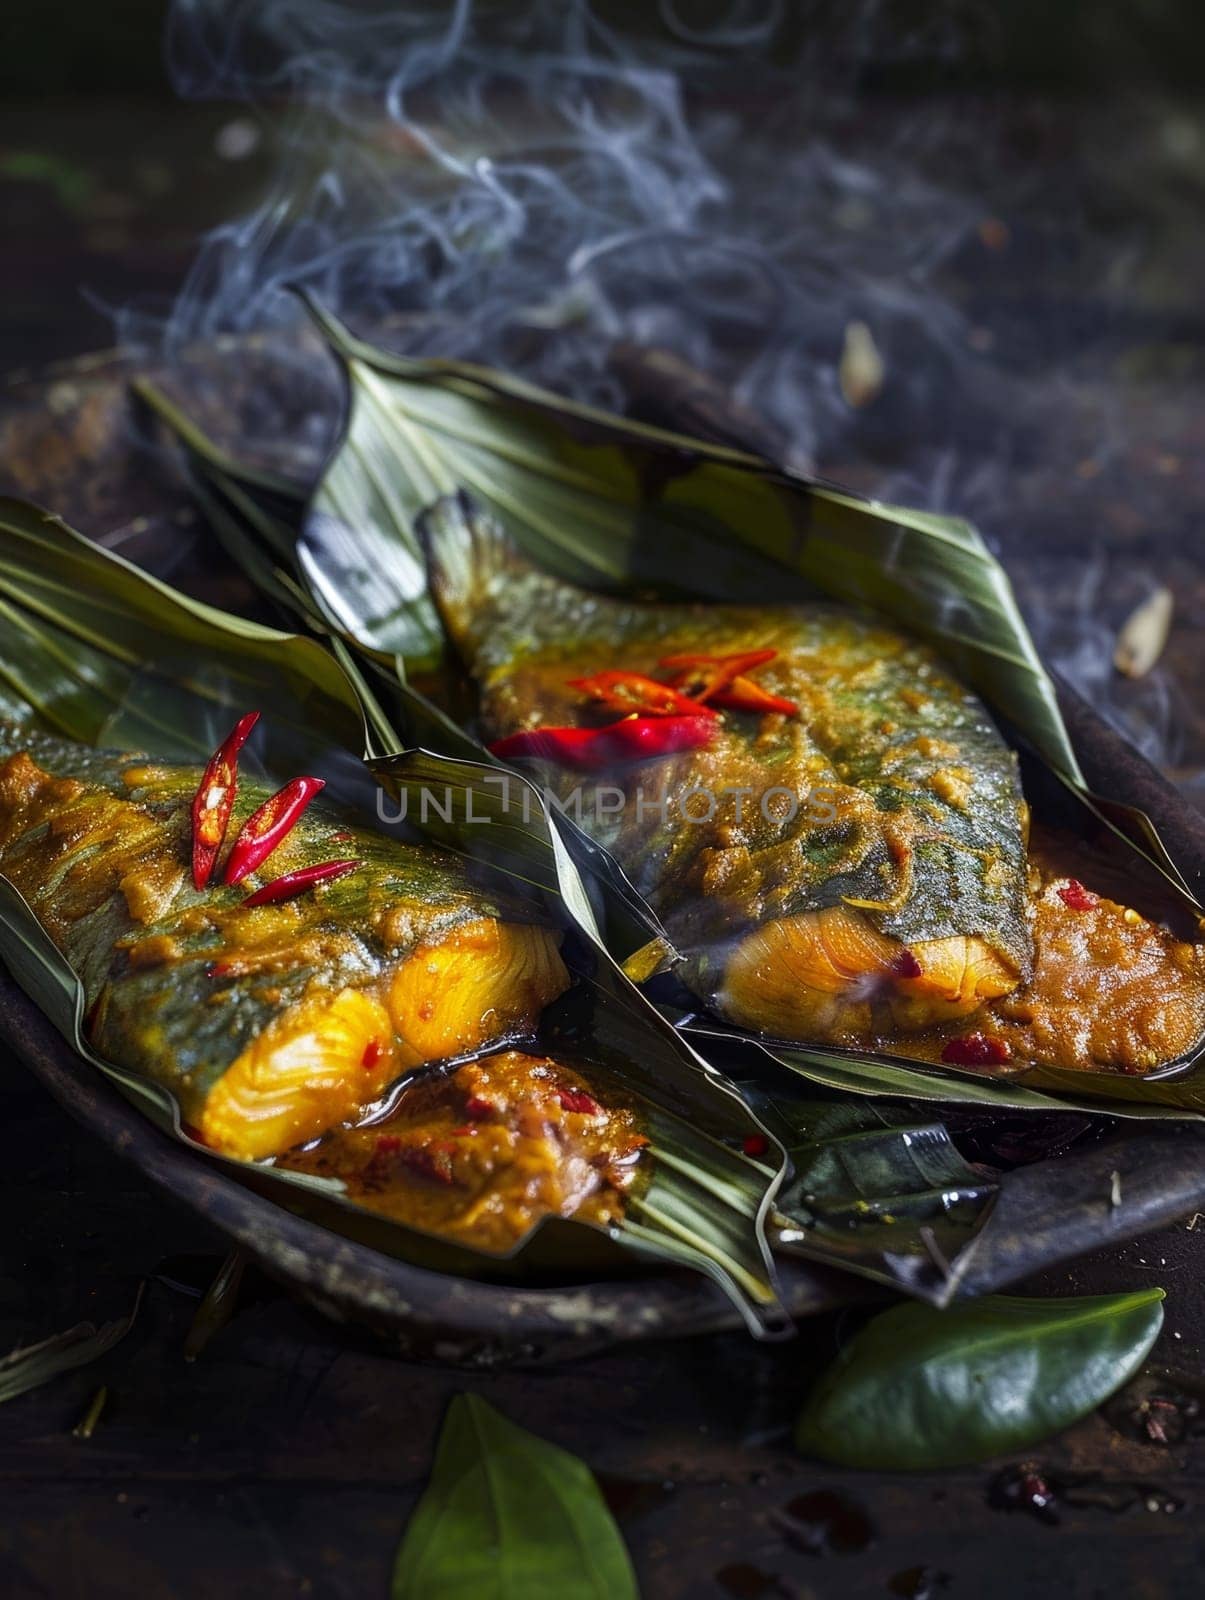 Cambodian amok, a traditional steamed fish dish wrapped in banana leaves and cooked in a fragrant curry paste and coconut milk. This ethnic specialty showcases the unique flavors. by sfinks